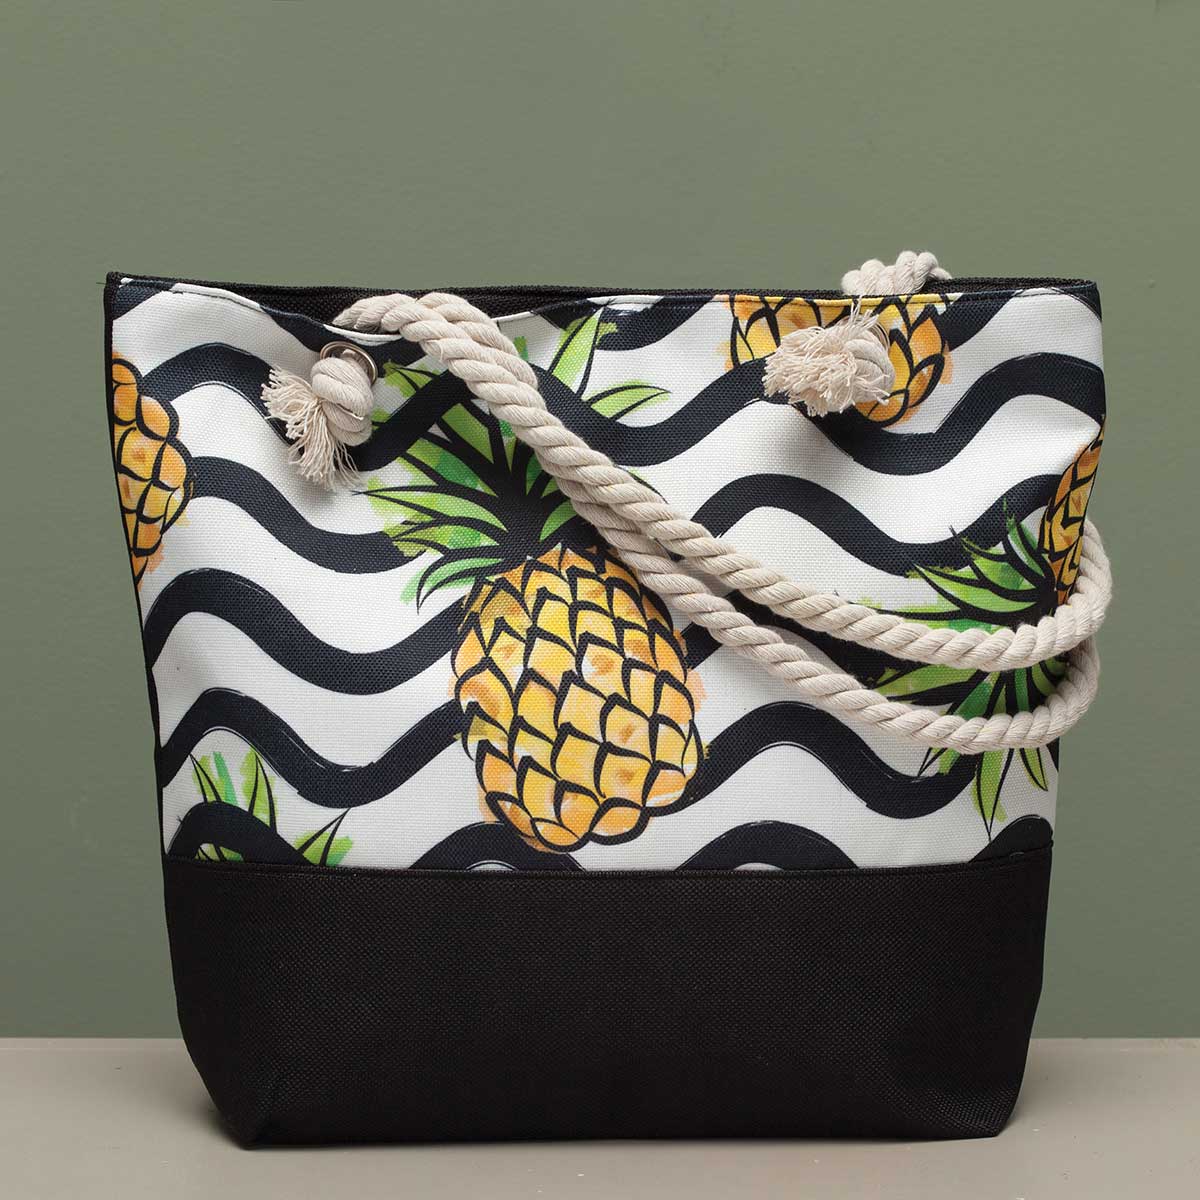 Pineapple with Wavy Stripe Tapestry Bag 17.5"x5"x14" with 10" Sh